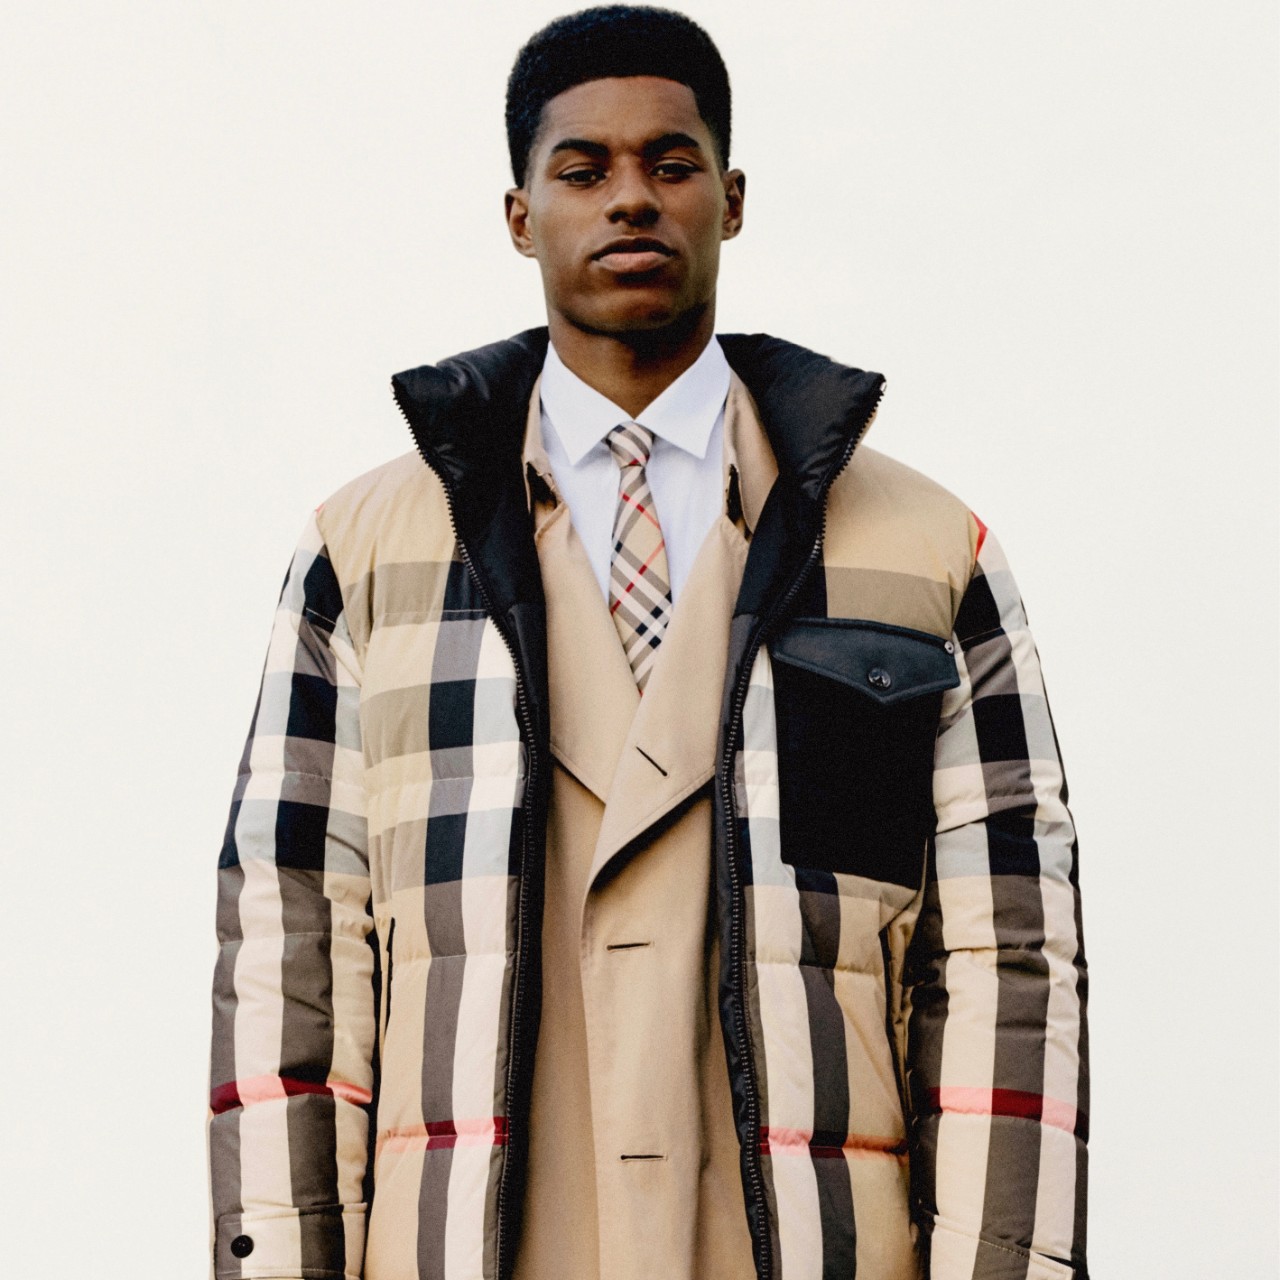 Burberry launches new campaign as part of its initiative to